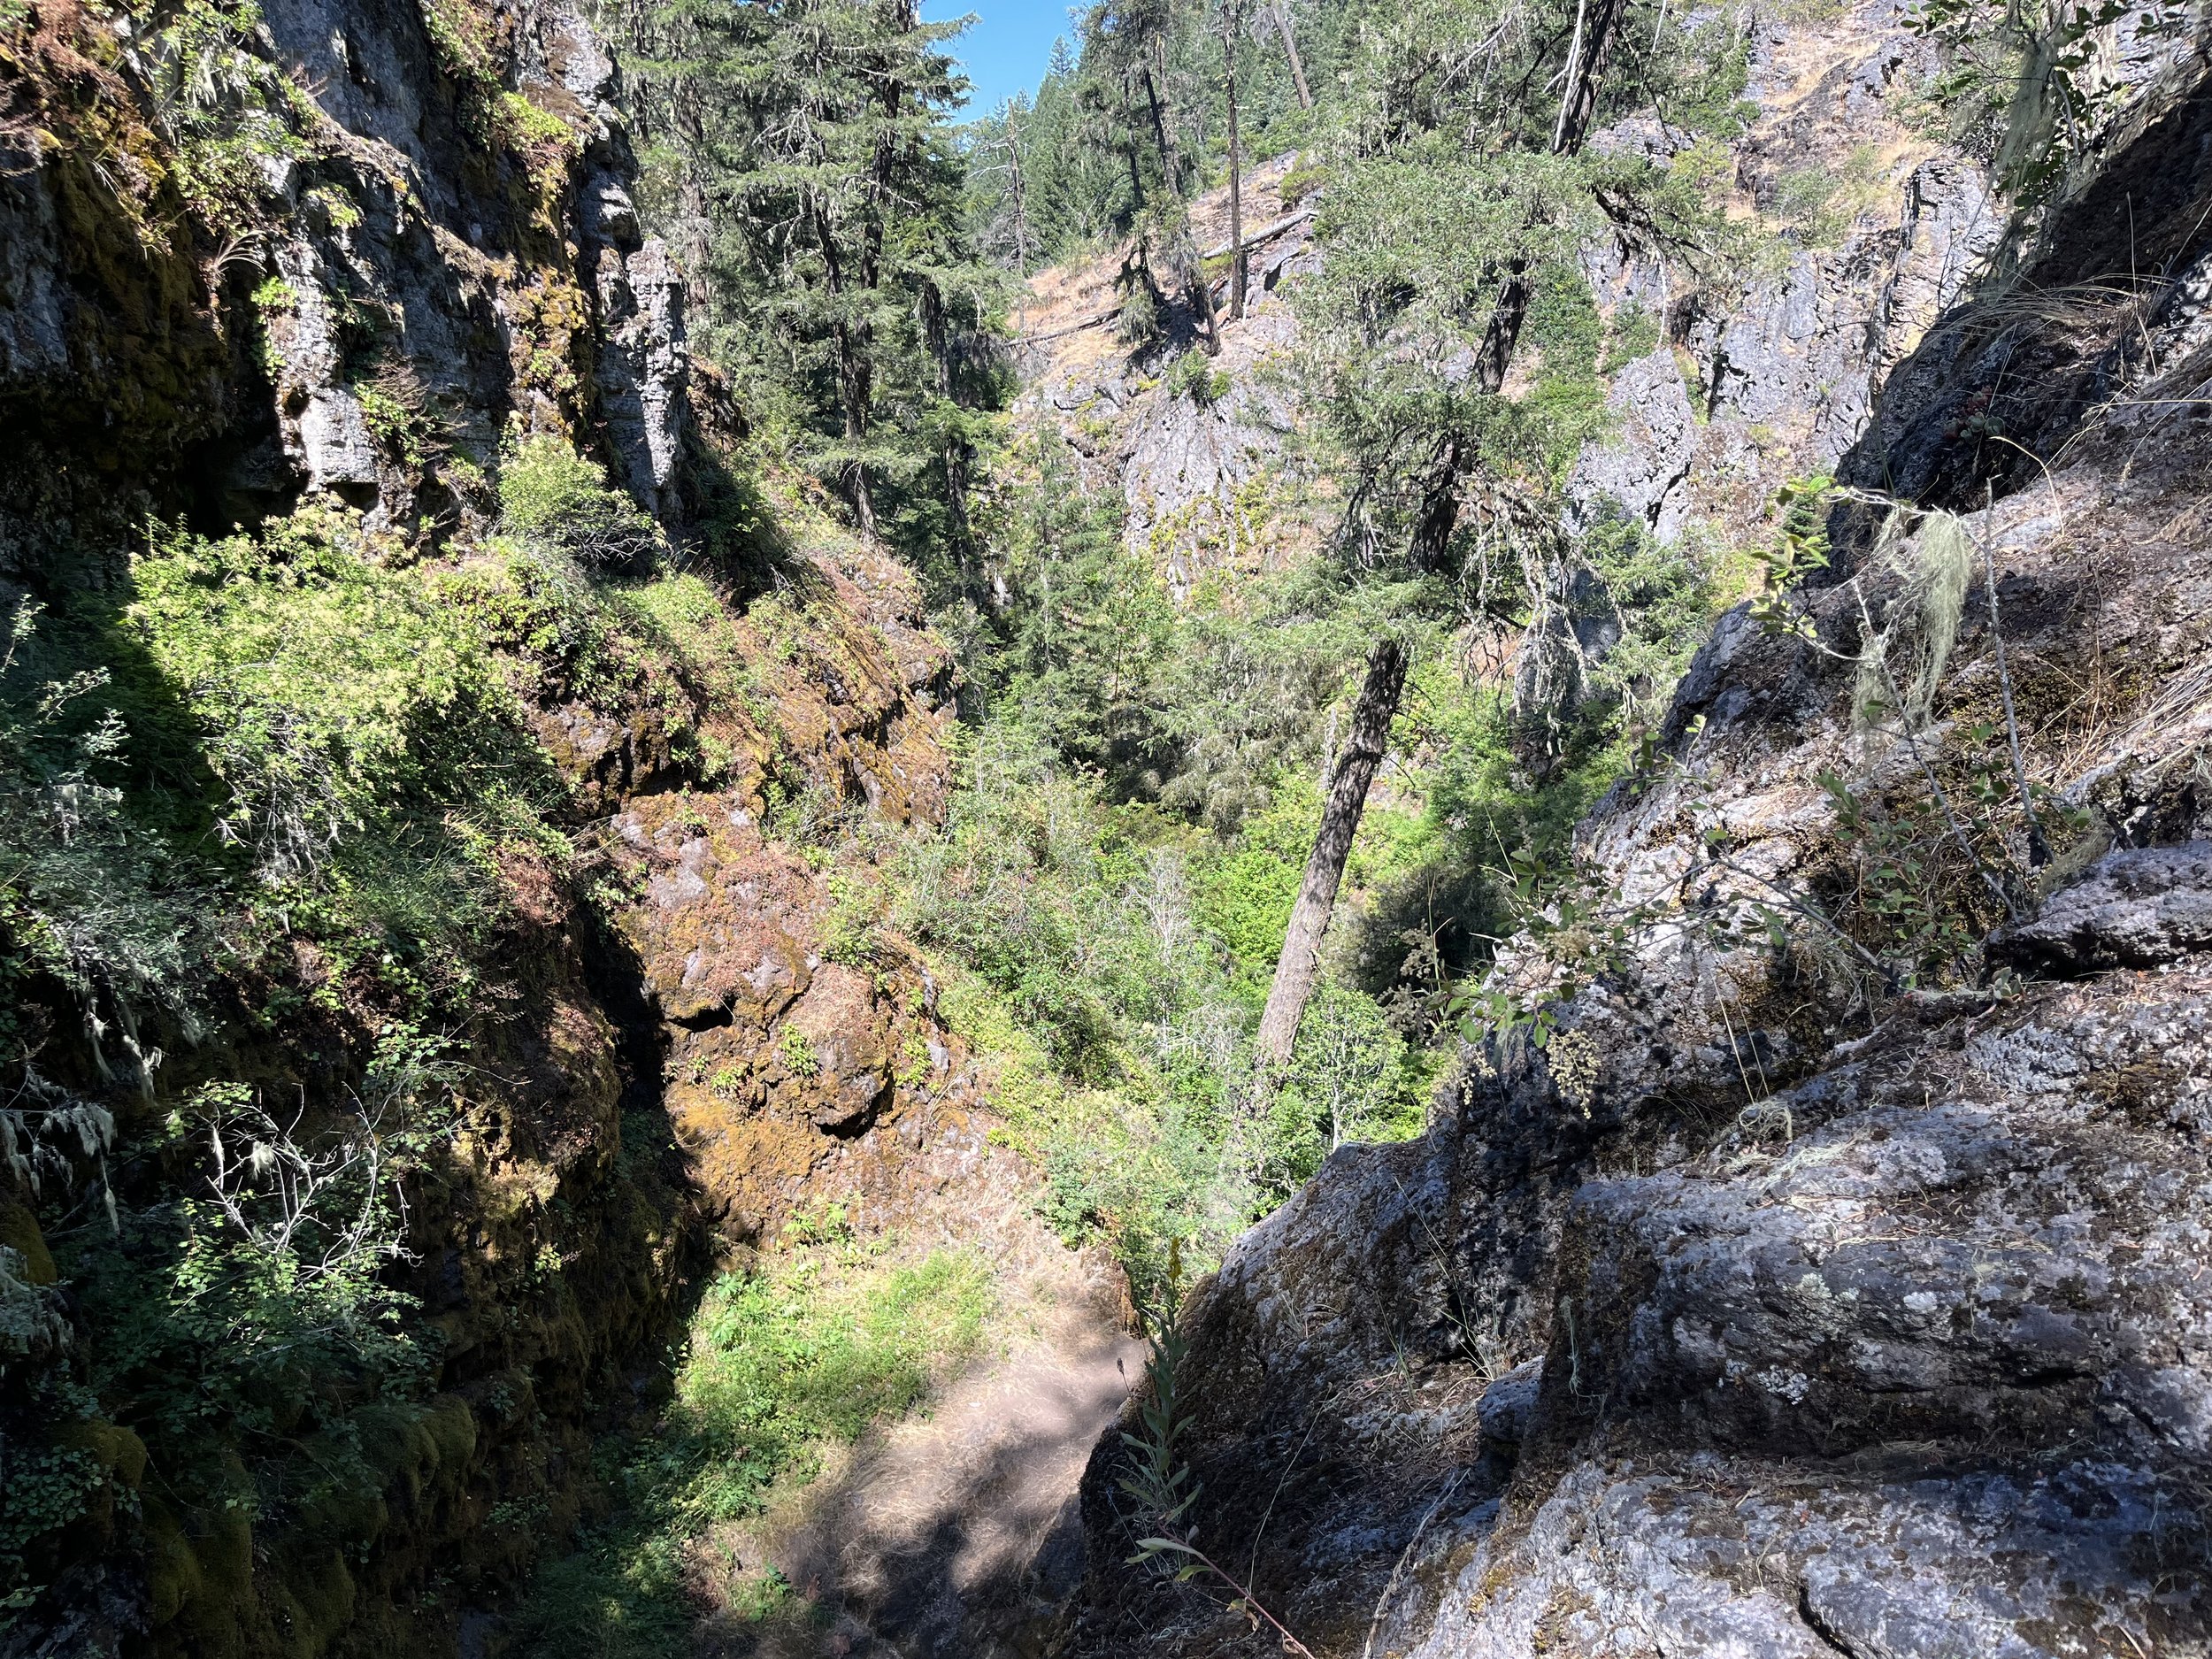  Bybee Gulch, the canyon carved out by Lost Creek and the landslide that made the falls 